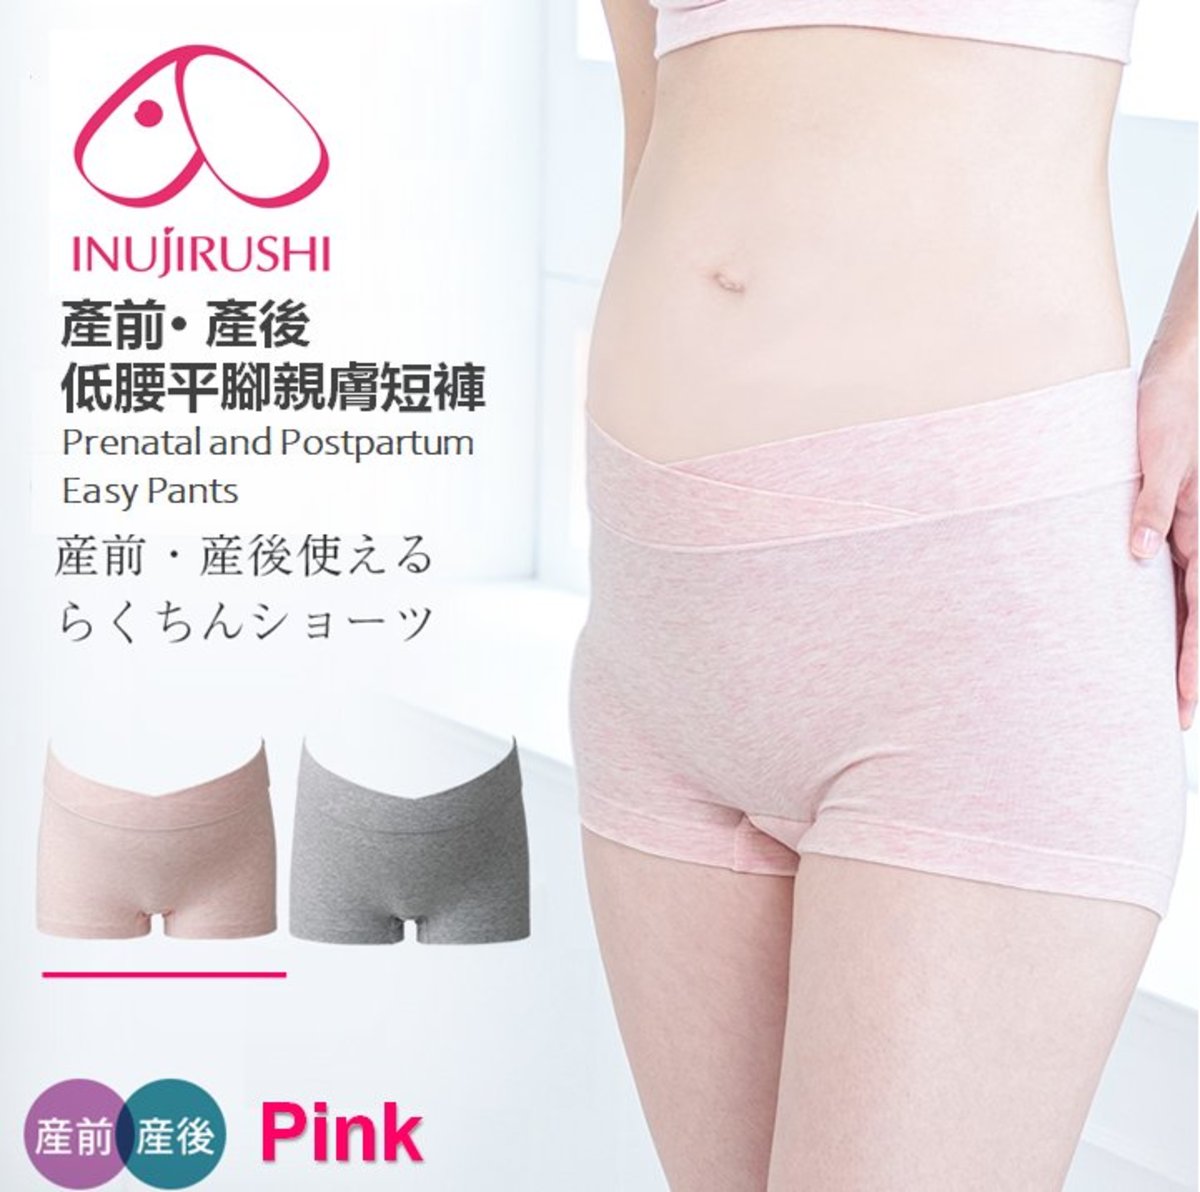 INUJIRUSHI, All-In-One Girdle (Advanced Version), Size L